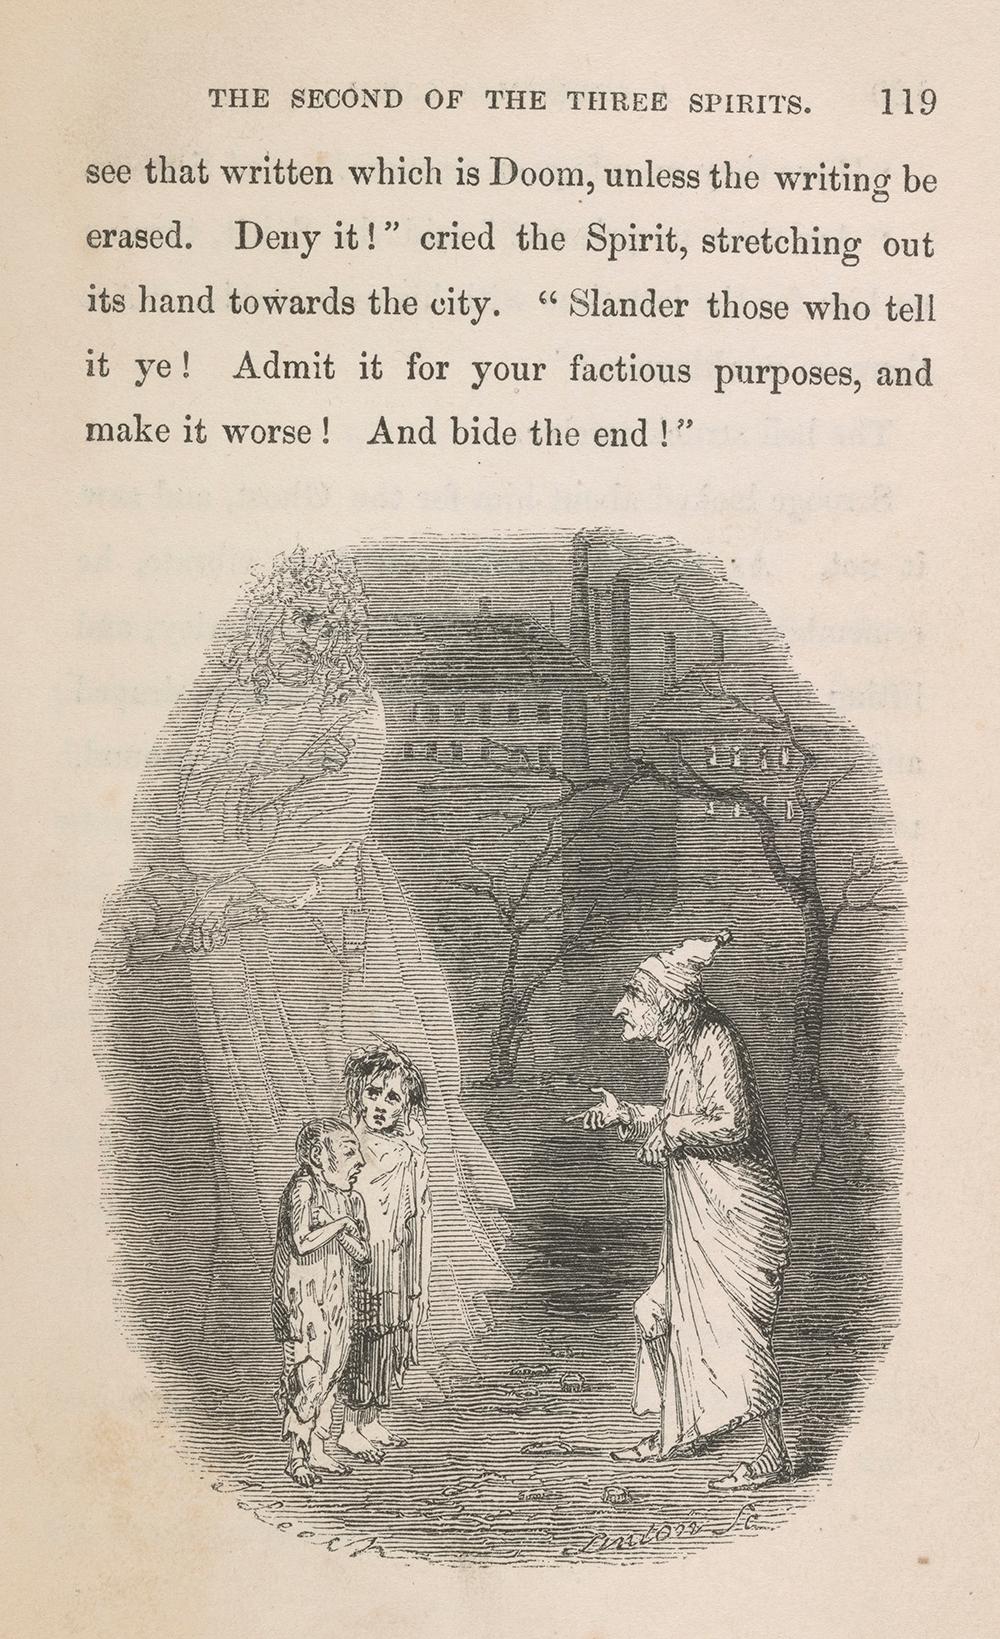 The Ghost of Christmas Present introducing Scrooge to the children Ignorance and Want, by W. T. Linton. Engraving after an illustration by John Leech in "A Christmas Carol in Prose: Being a Ghost Story of Christmas," 1843. Bequest of Gordon N. Ray, The Morgan Library & Museum. (Graham S. Haber)